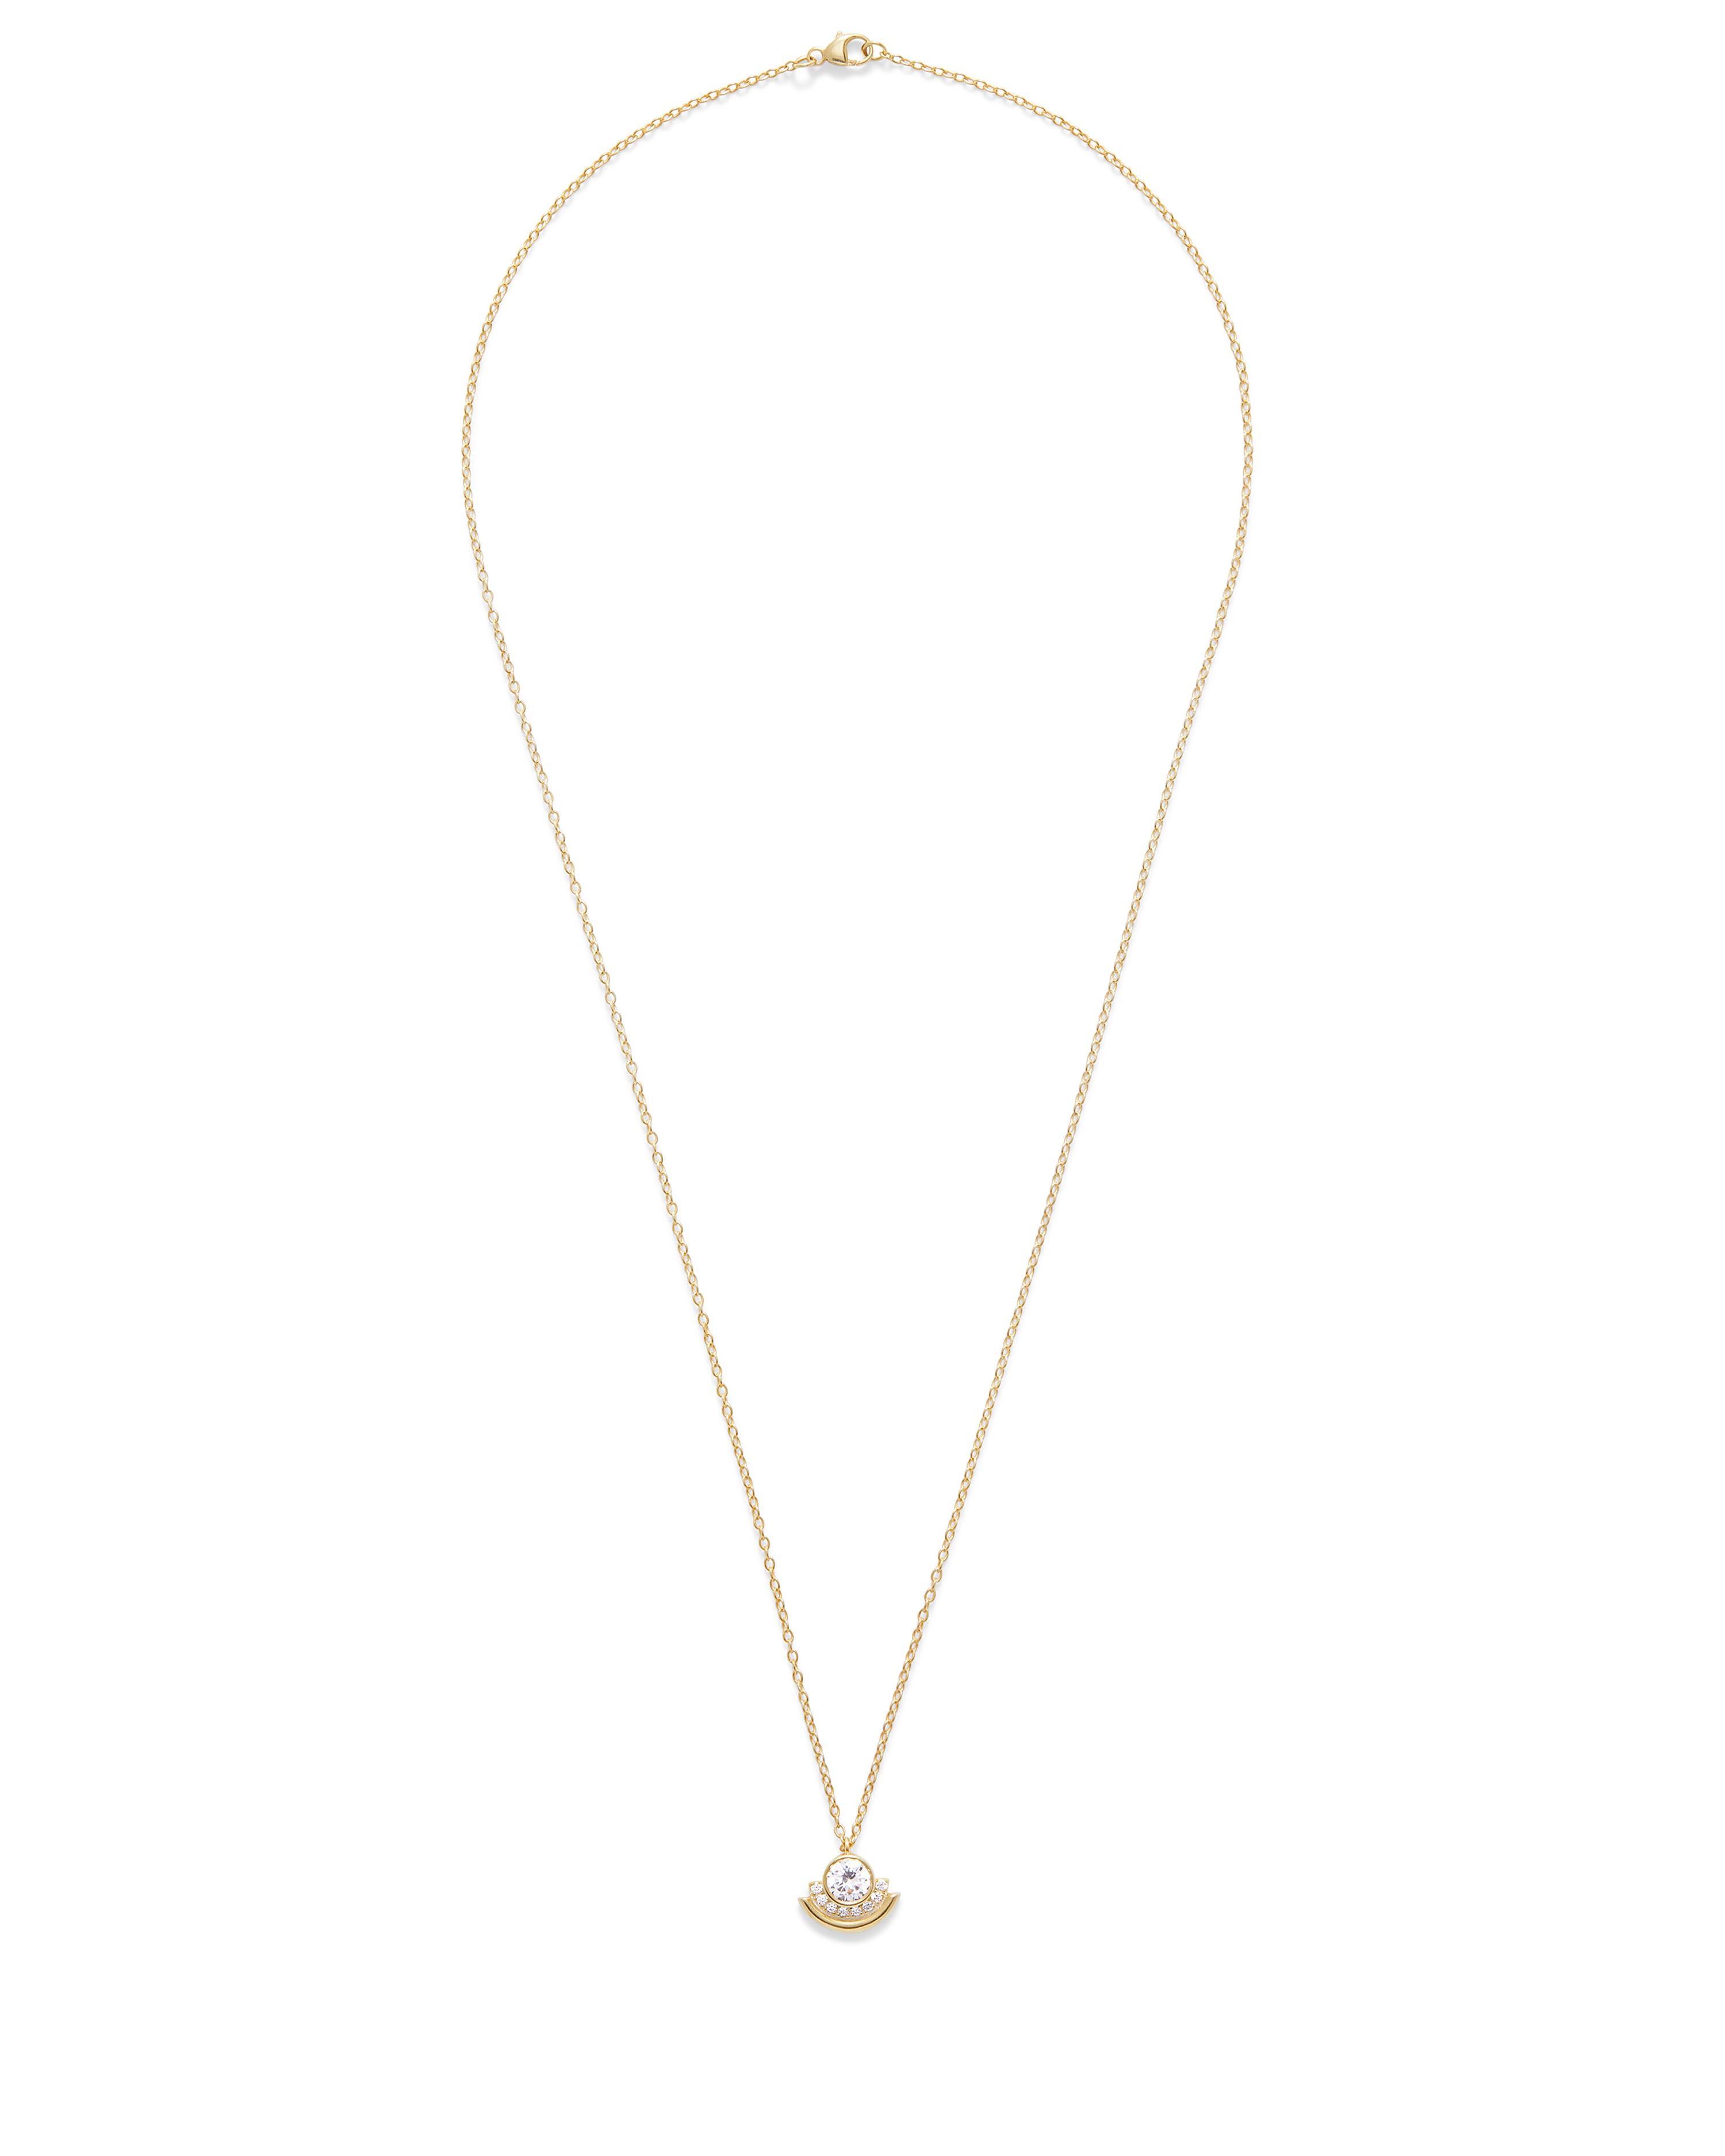 Architectural yet minimal arc shaped pendant in 18K yellow gold hanging from a delicate cable chain. The pendant features a modern banded detail on the edges which are set with pave diamonds. Total diamond weight is .8 carats. The necklace is 18